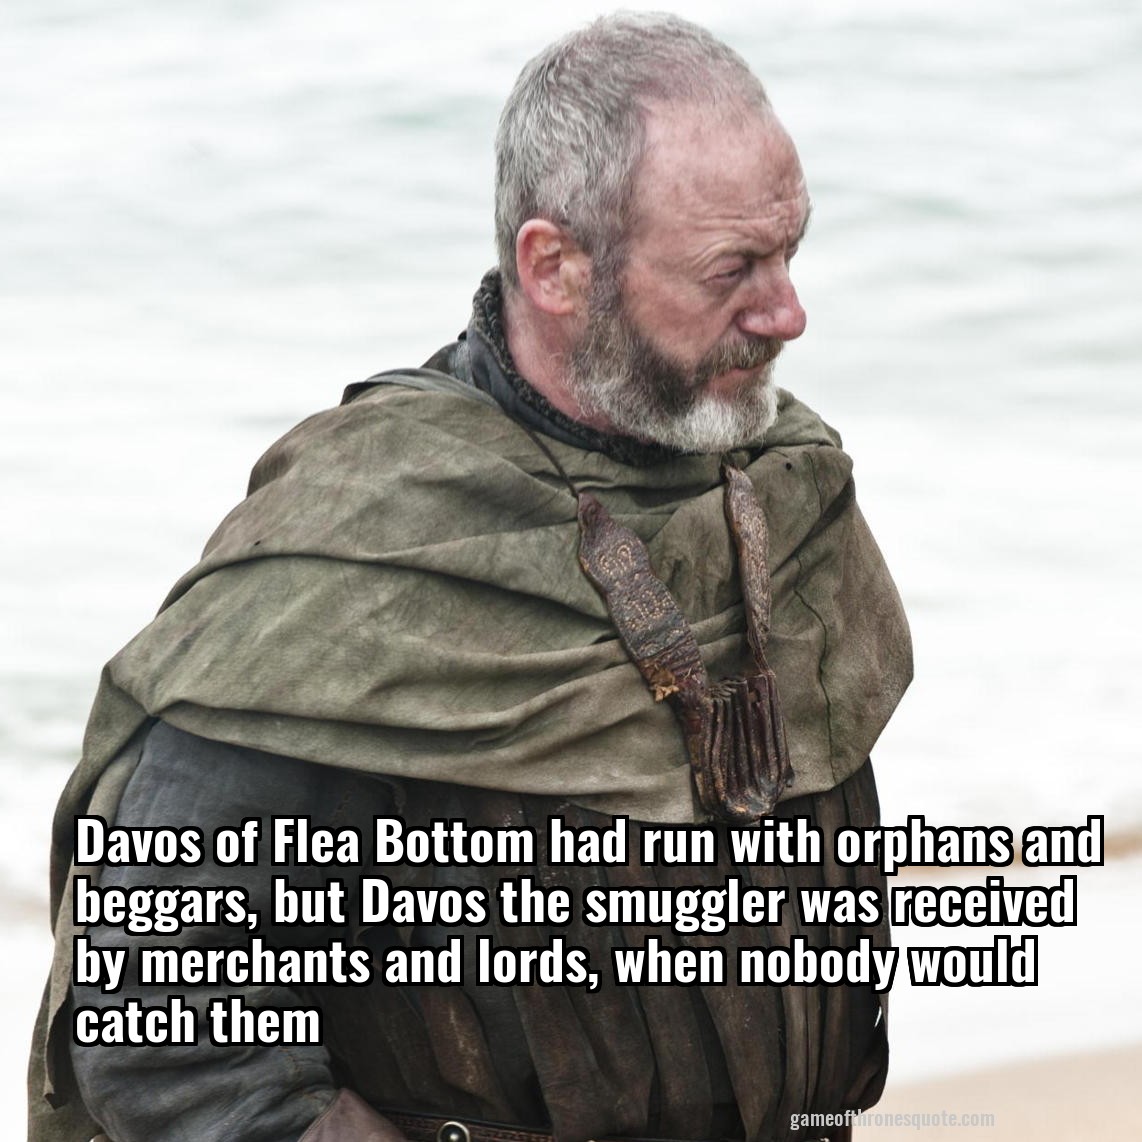 Davos of Flea Bottom had run with orphans and beggars, but Davos the smuggler was received by merchants and lords, when nobody would catch them